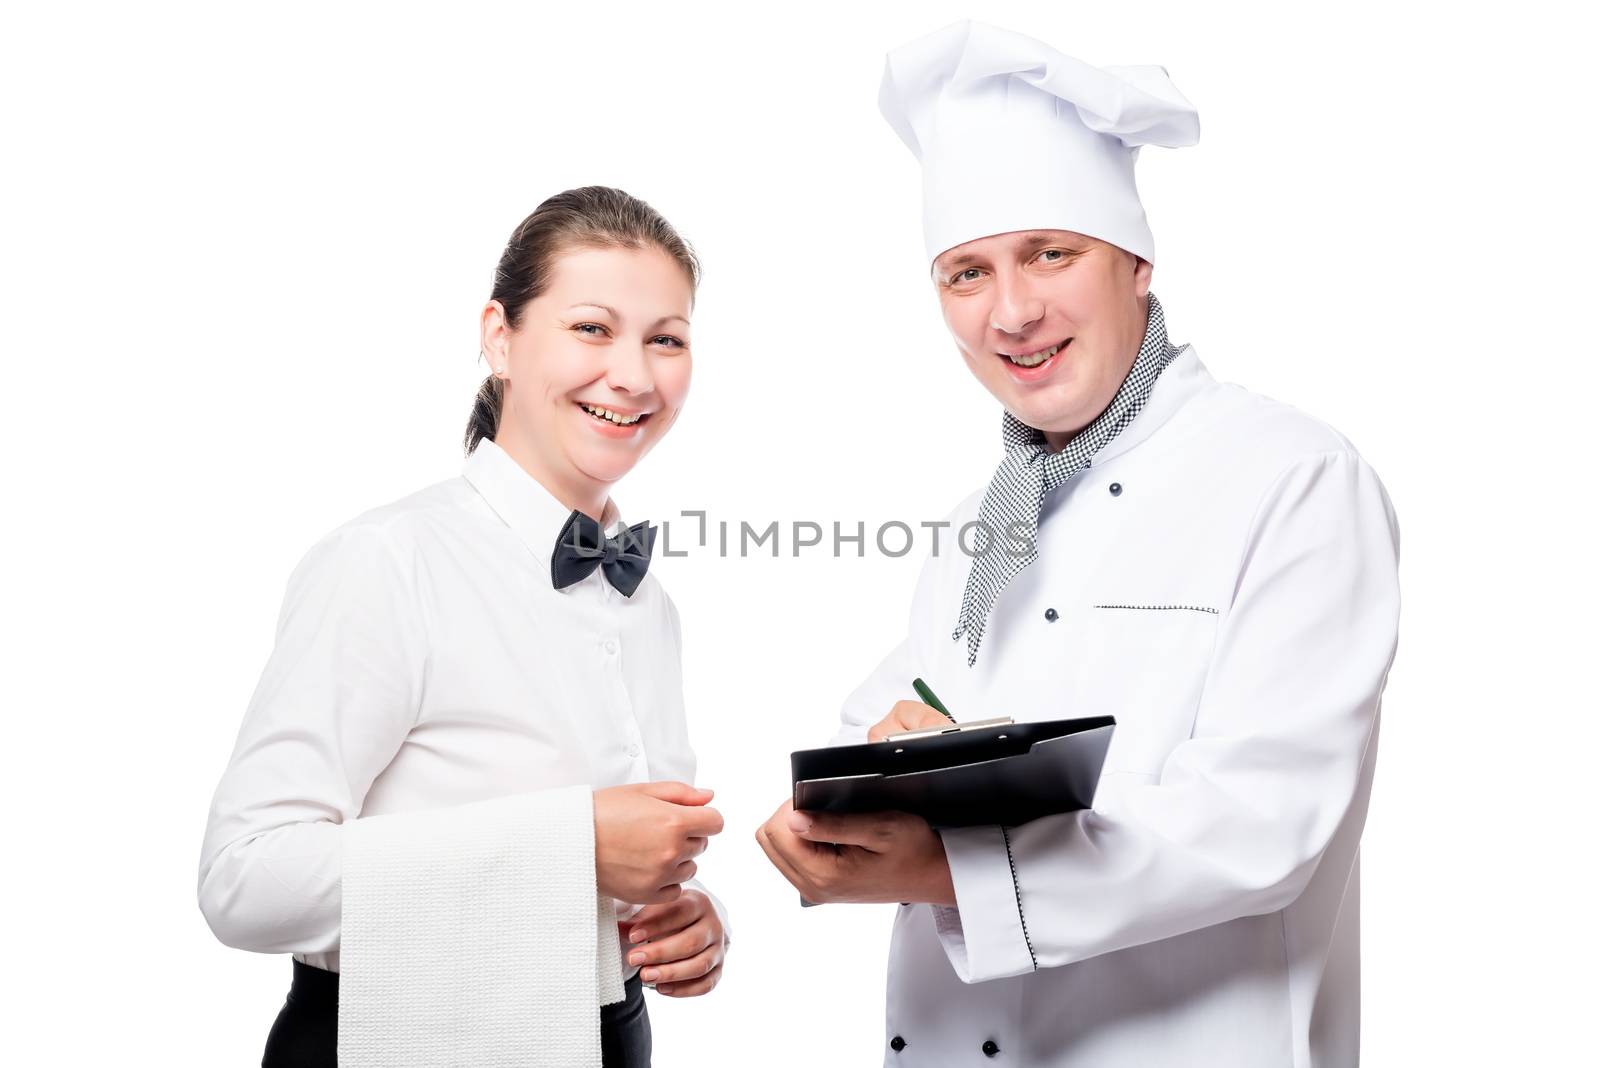 Chef with a folder and a waiter with a towel smiling on a white background in the studio